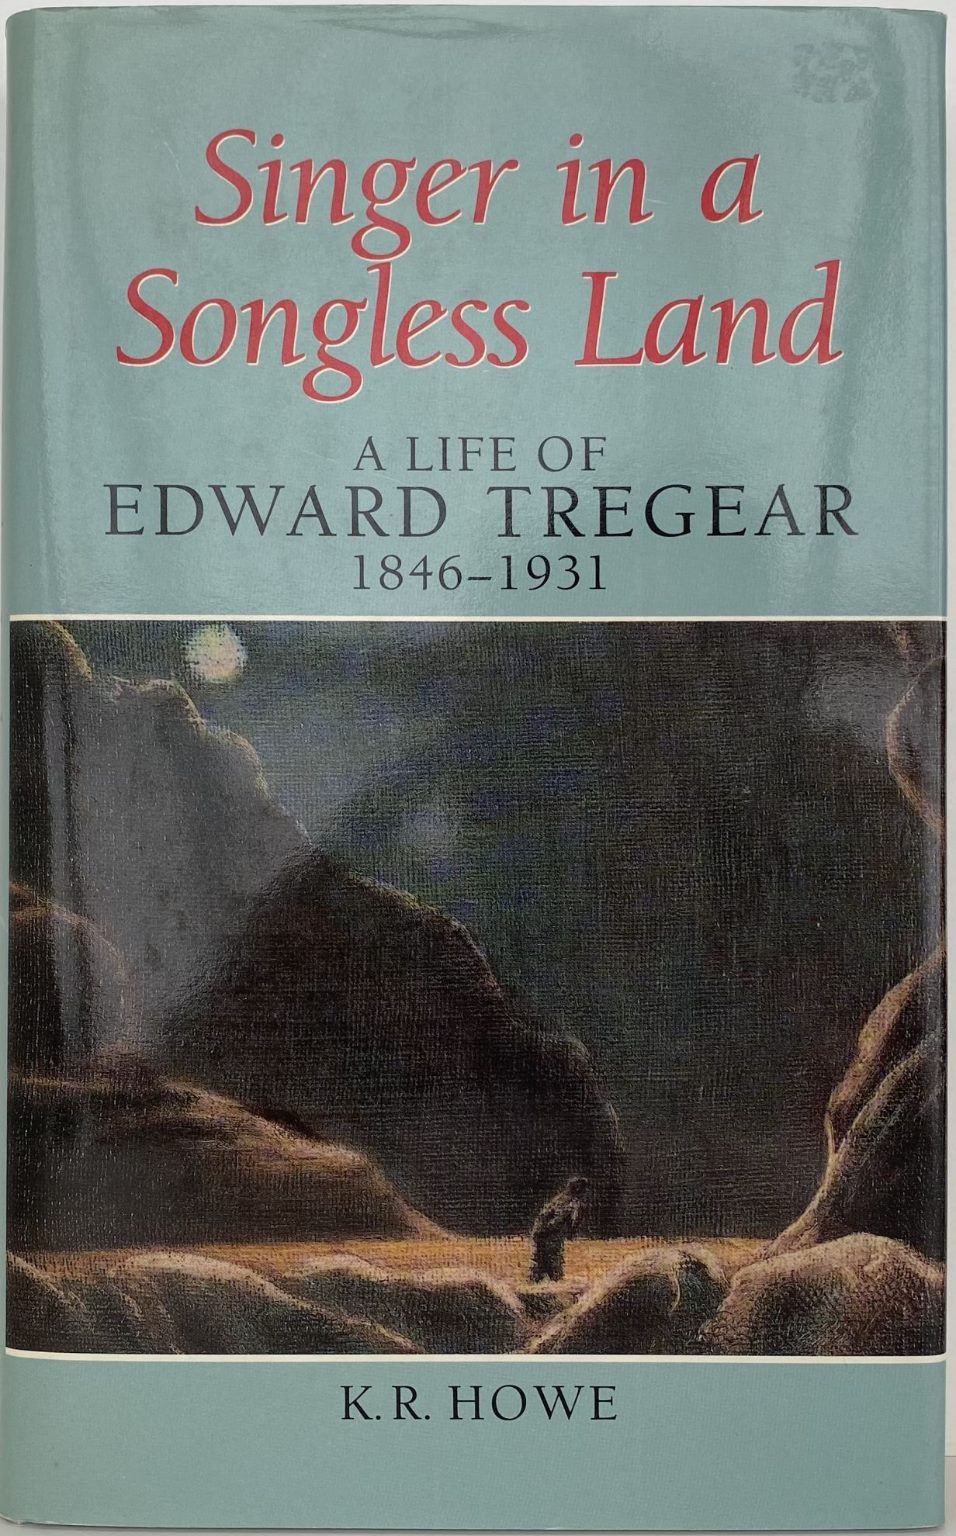 SINGER IN A SONGLESS LAND: A Life of Edward Tregear 1846-1931